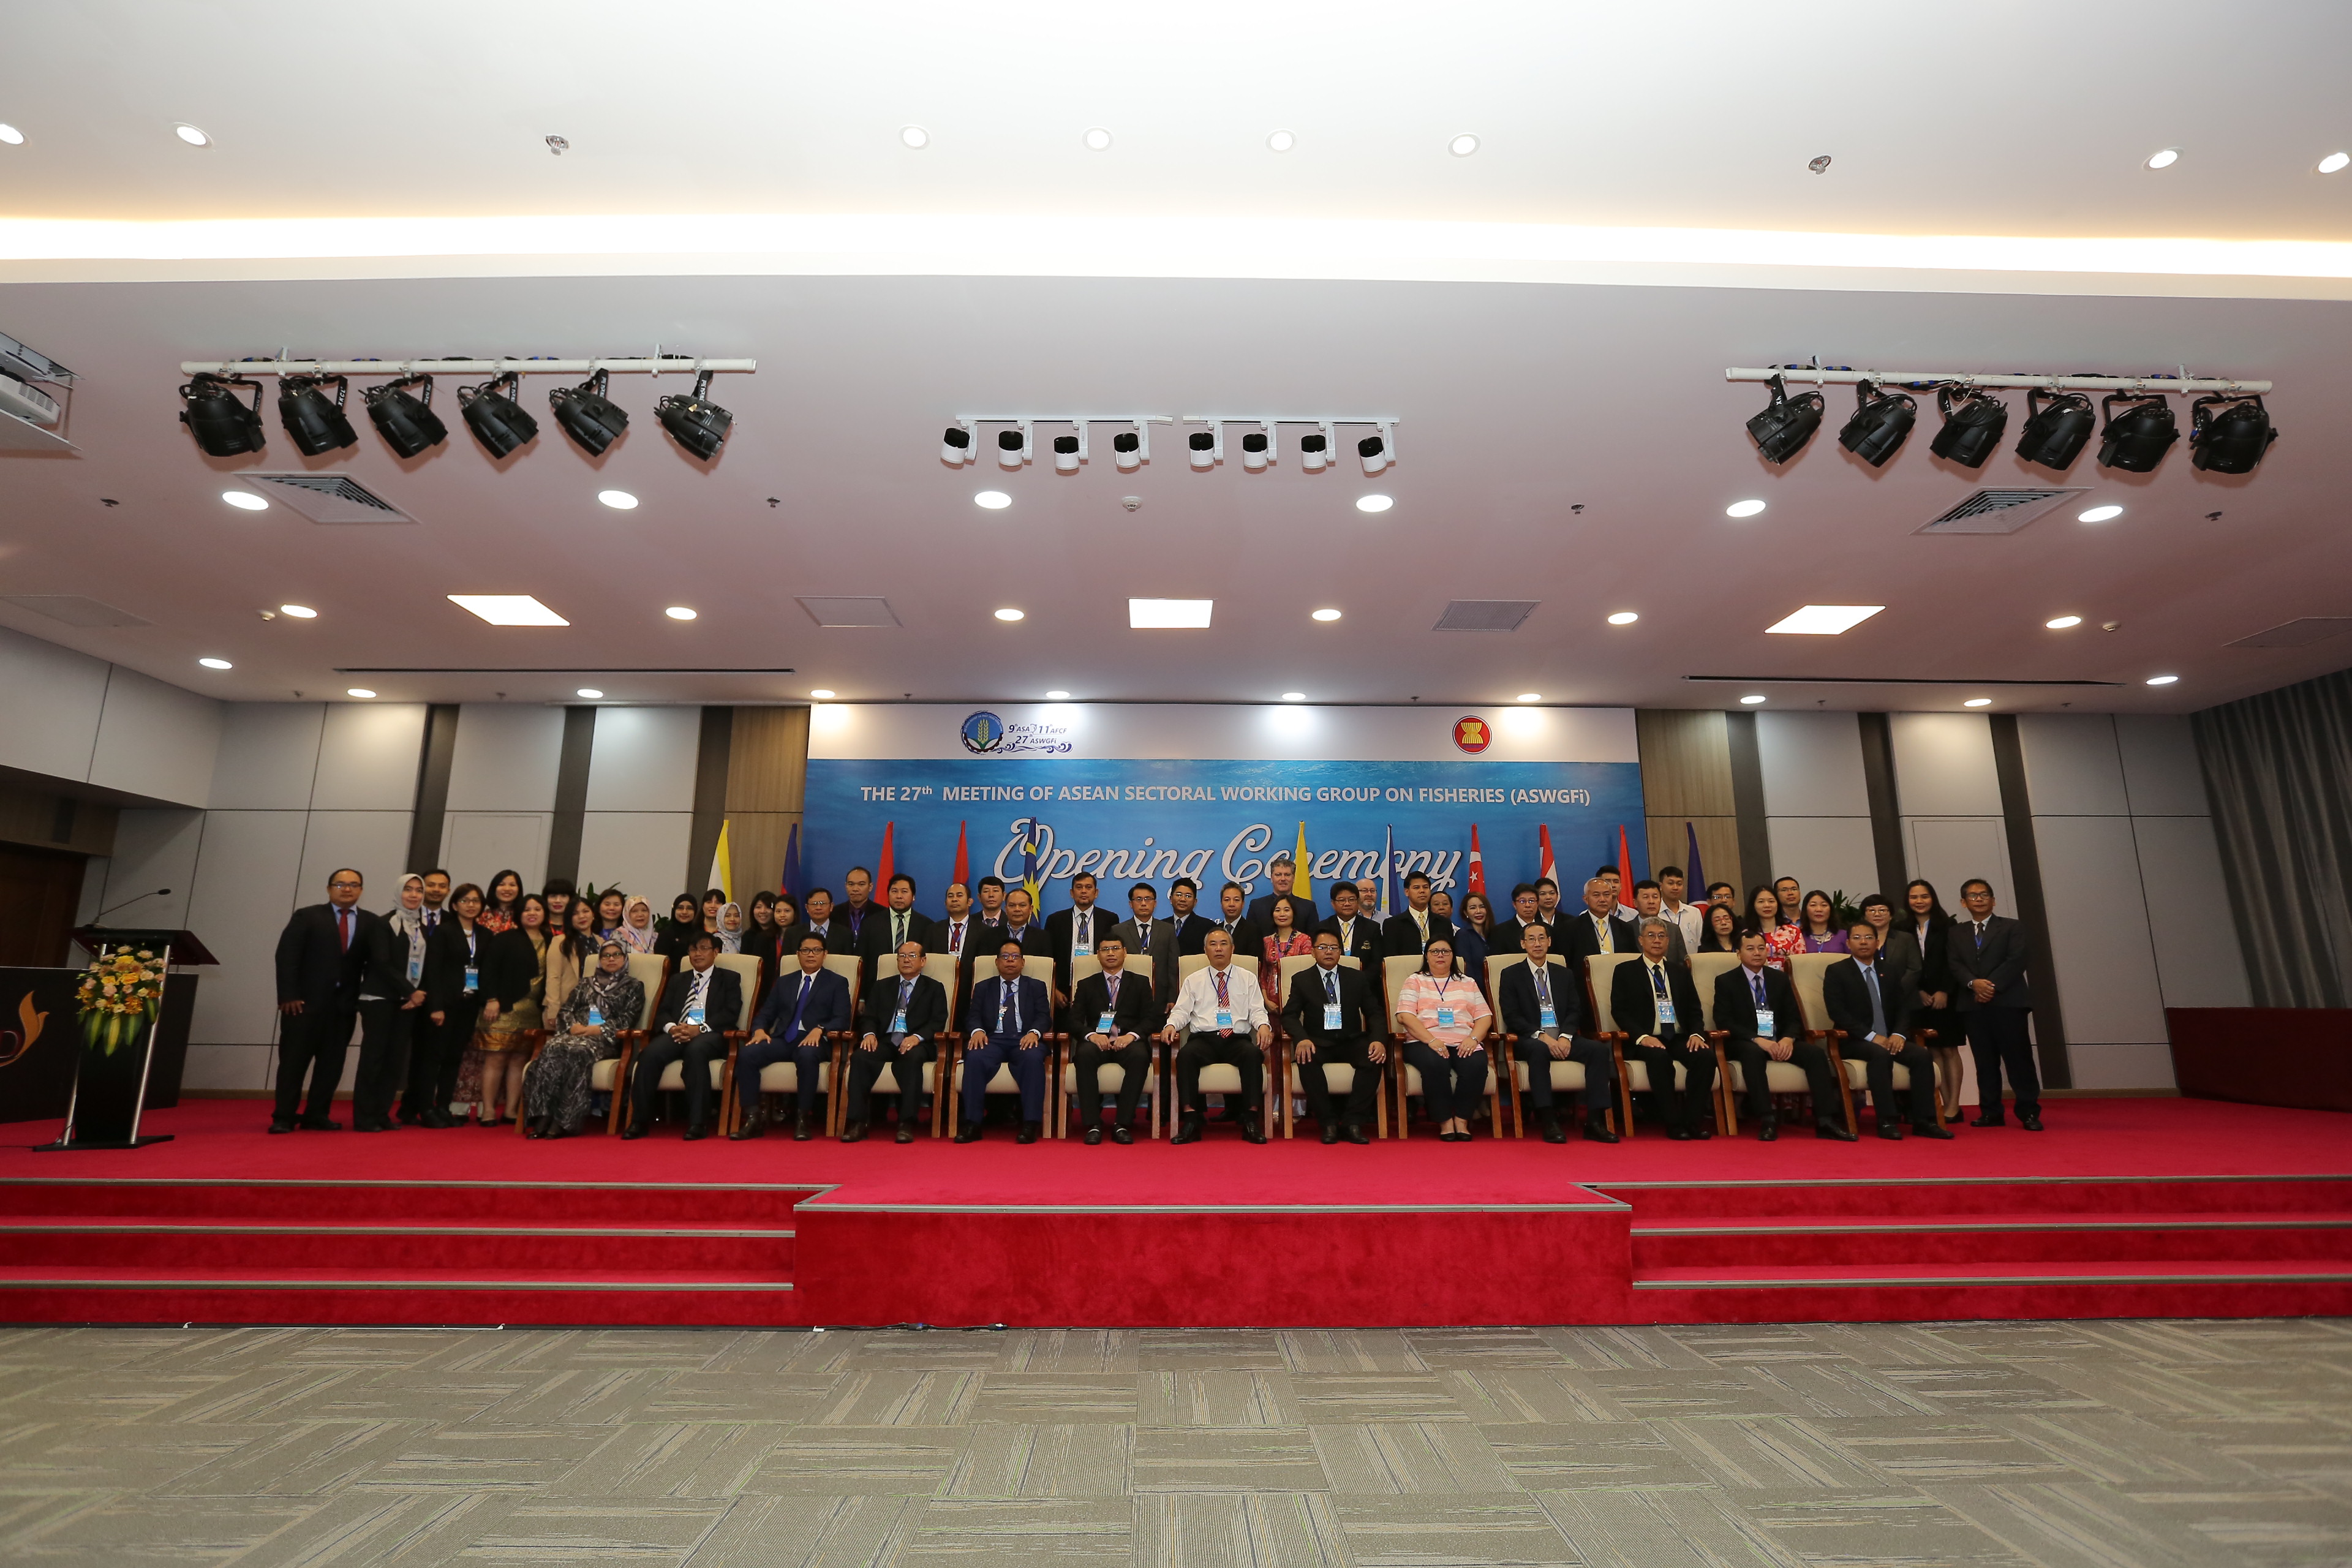 PRESS RELEASE On the result of the 9th Meeting of ASEAN Shrimp Alliance (9th ASA), The 11th Meeting of ASEAN Fisheries Consultative Forum (11th AFCF) and The 27th Meeting of ASEAN Sectoral Working Group on Fisheries (27th ASWGFi)